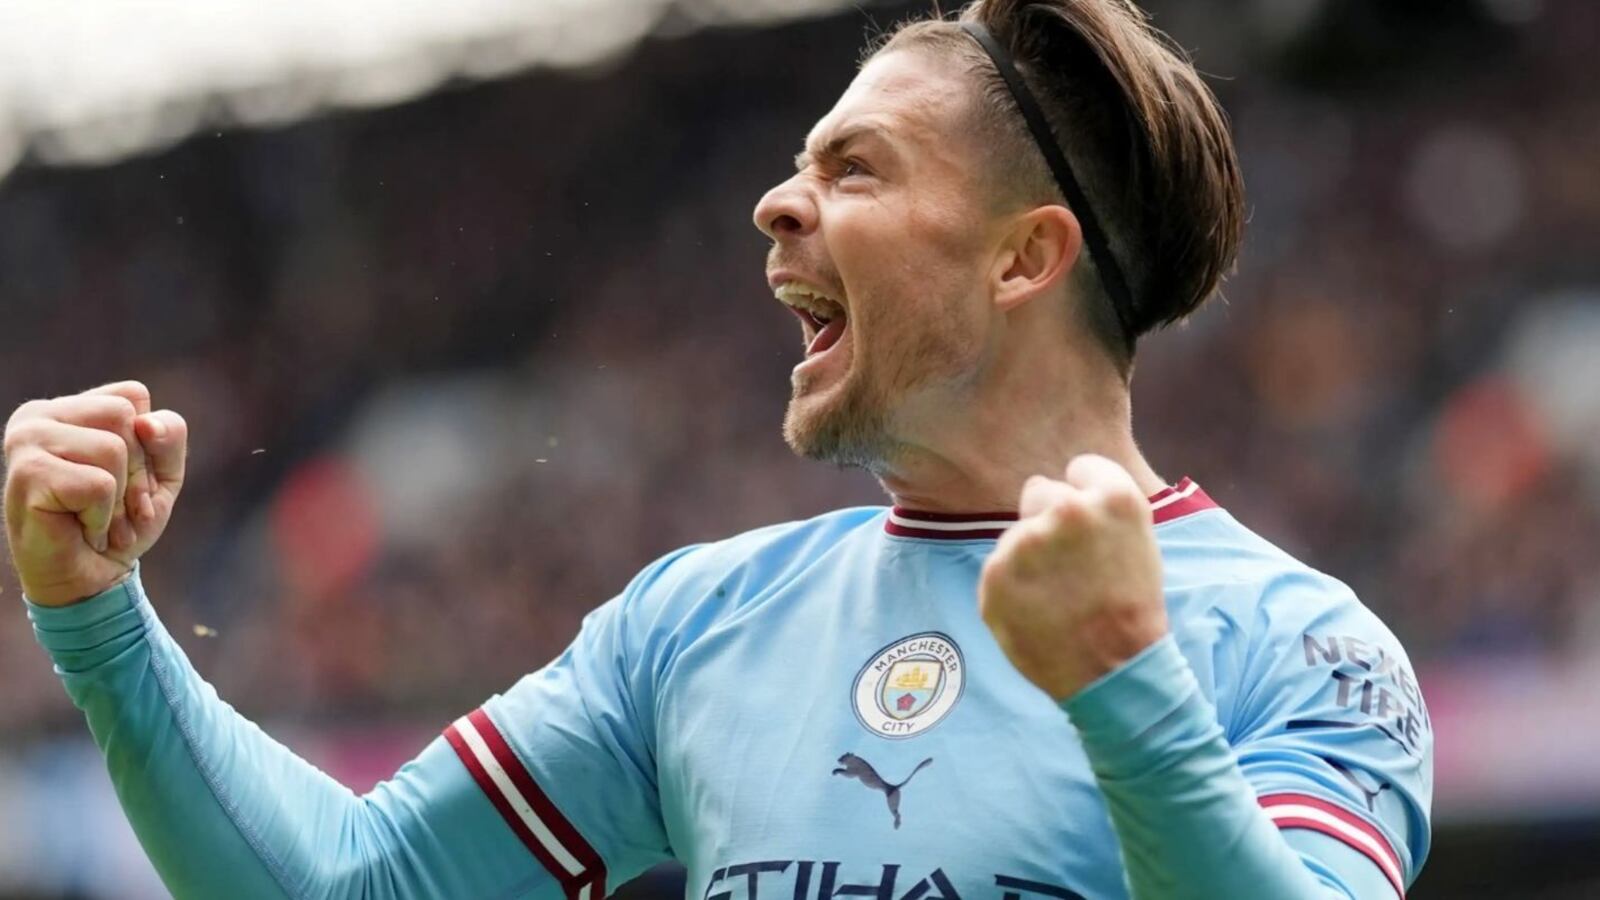 Jack Grealish excitement after meeting his childhood idol in Manchester City training ground